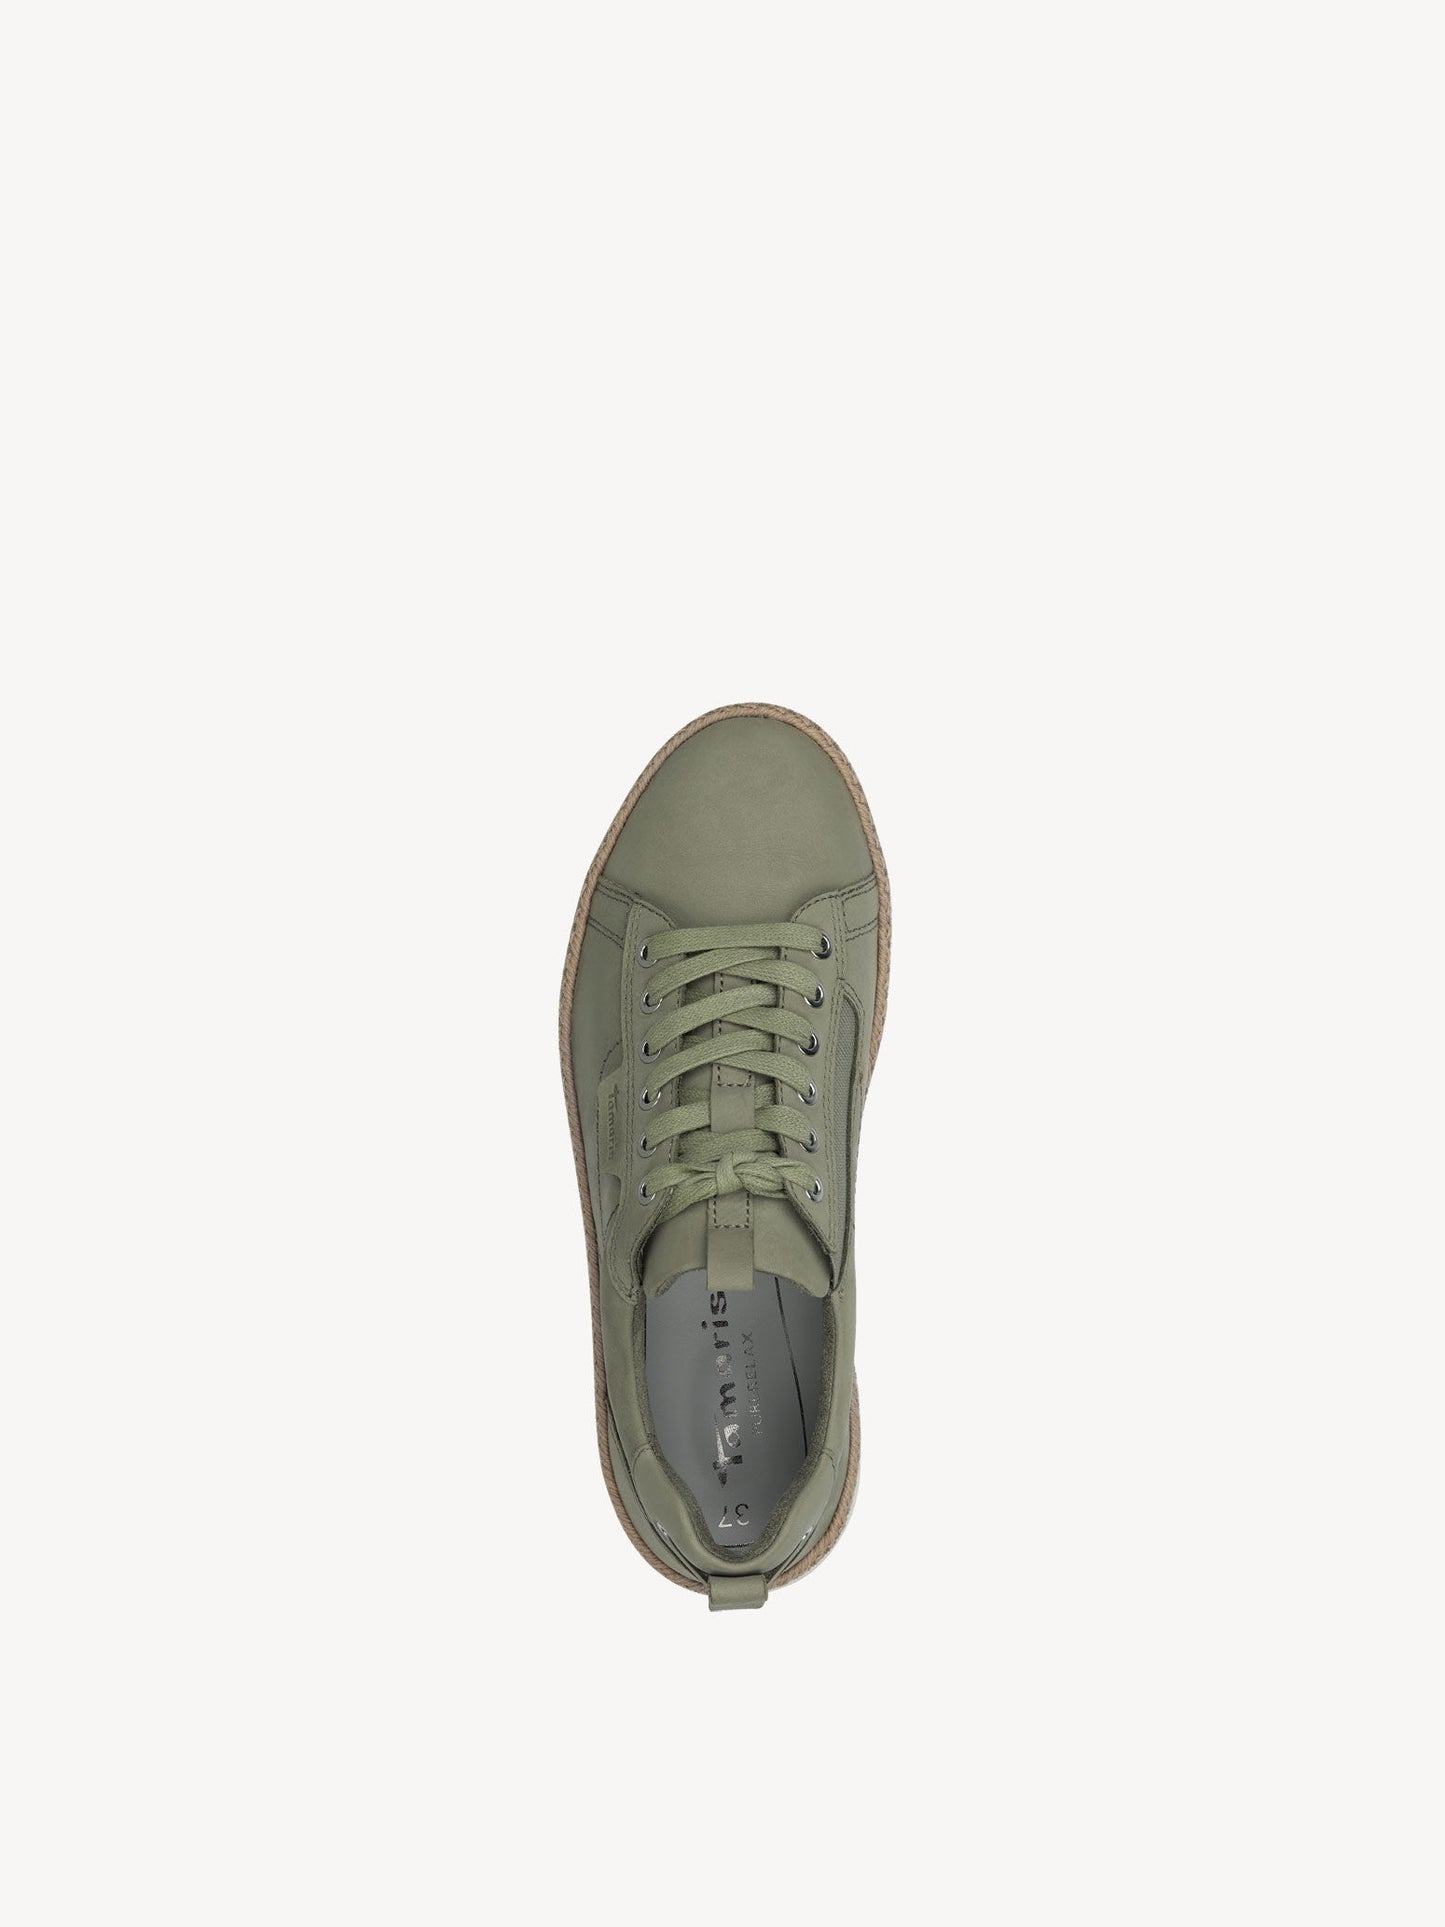 Tamaris Women's 1-1-23783-30 771 Leather Lace-Up Sneakers Sage Green